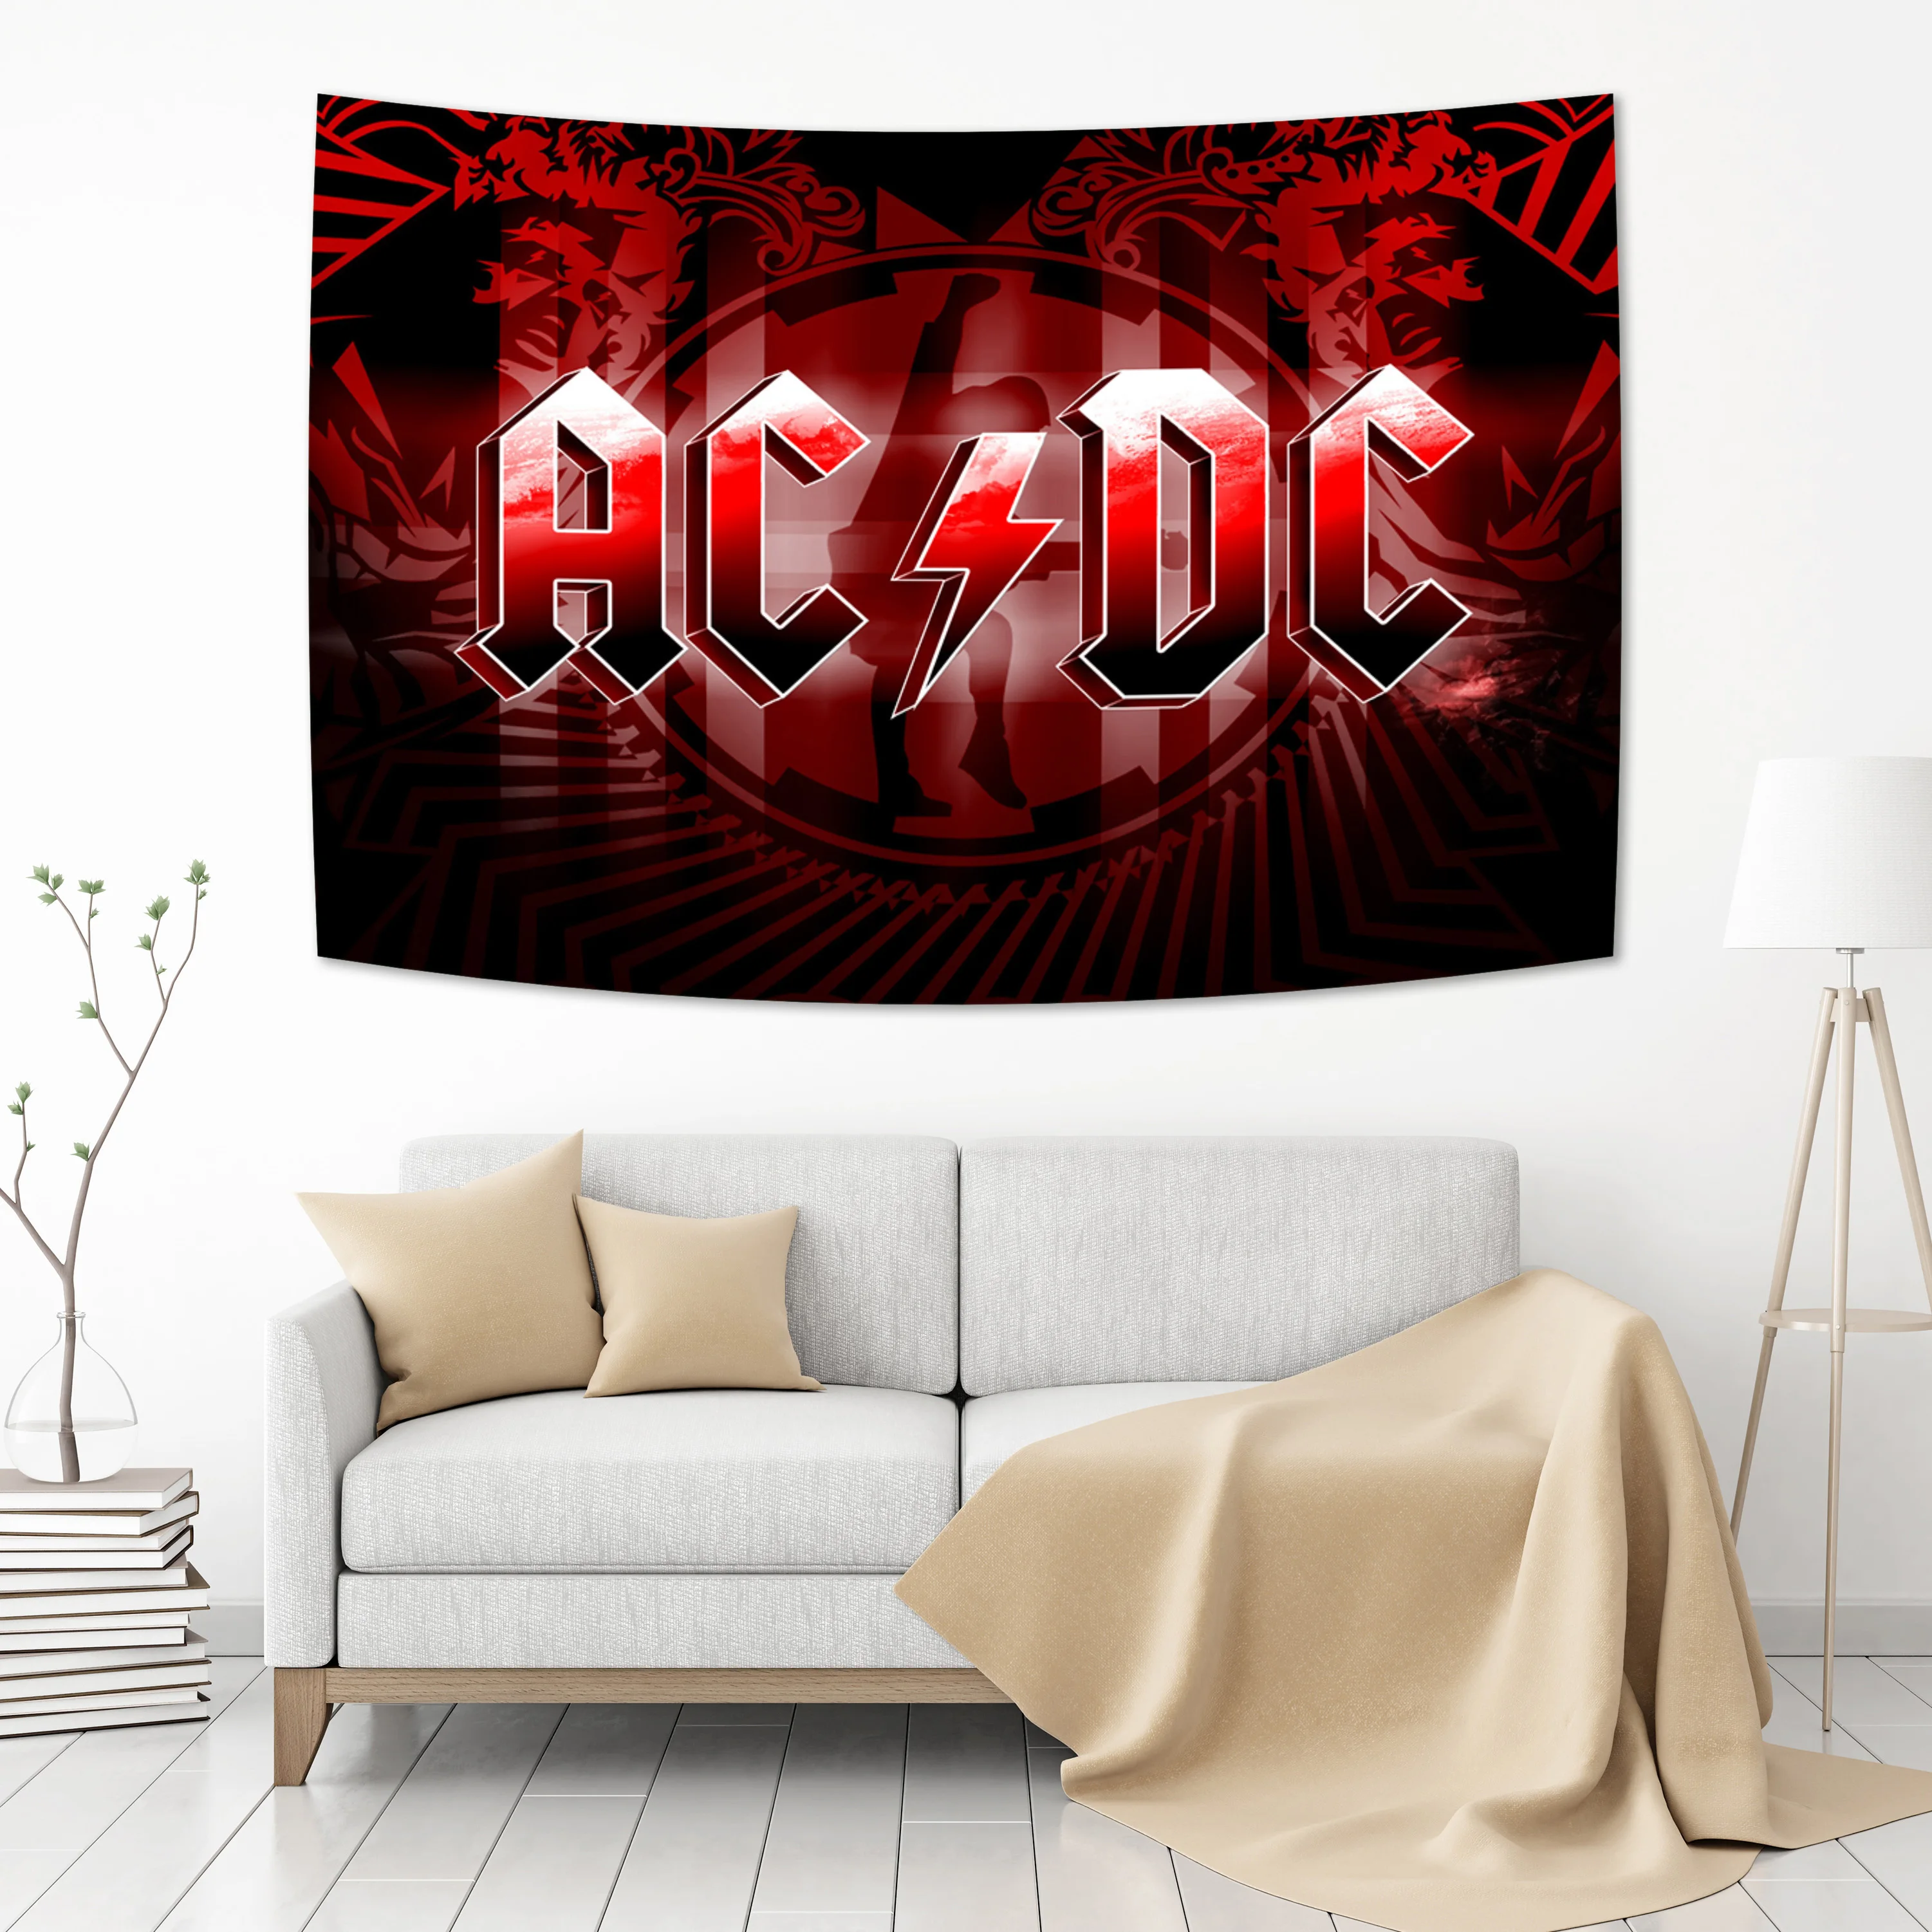 

AC//DC Band Tapestry Art Decoration Bedroom Wall Hanging Room Decor Aesthetic Custom Tapestries Headboards Home Decorative